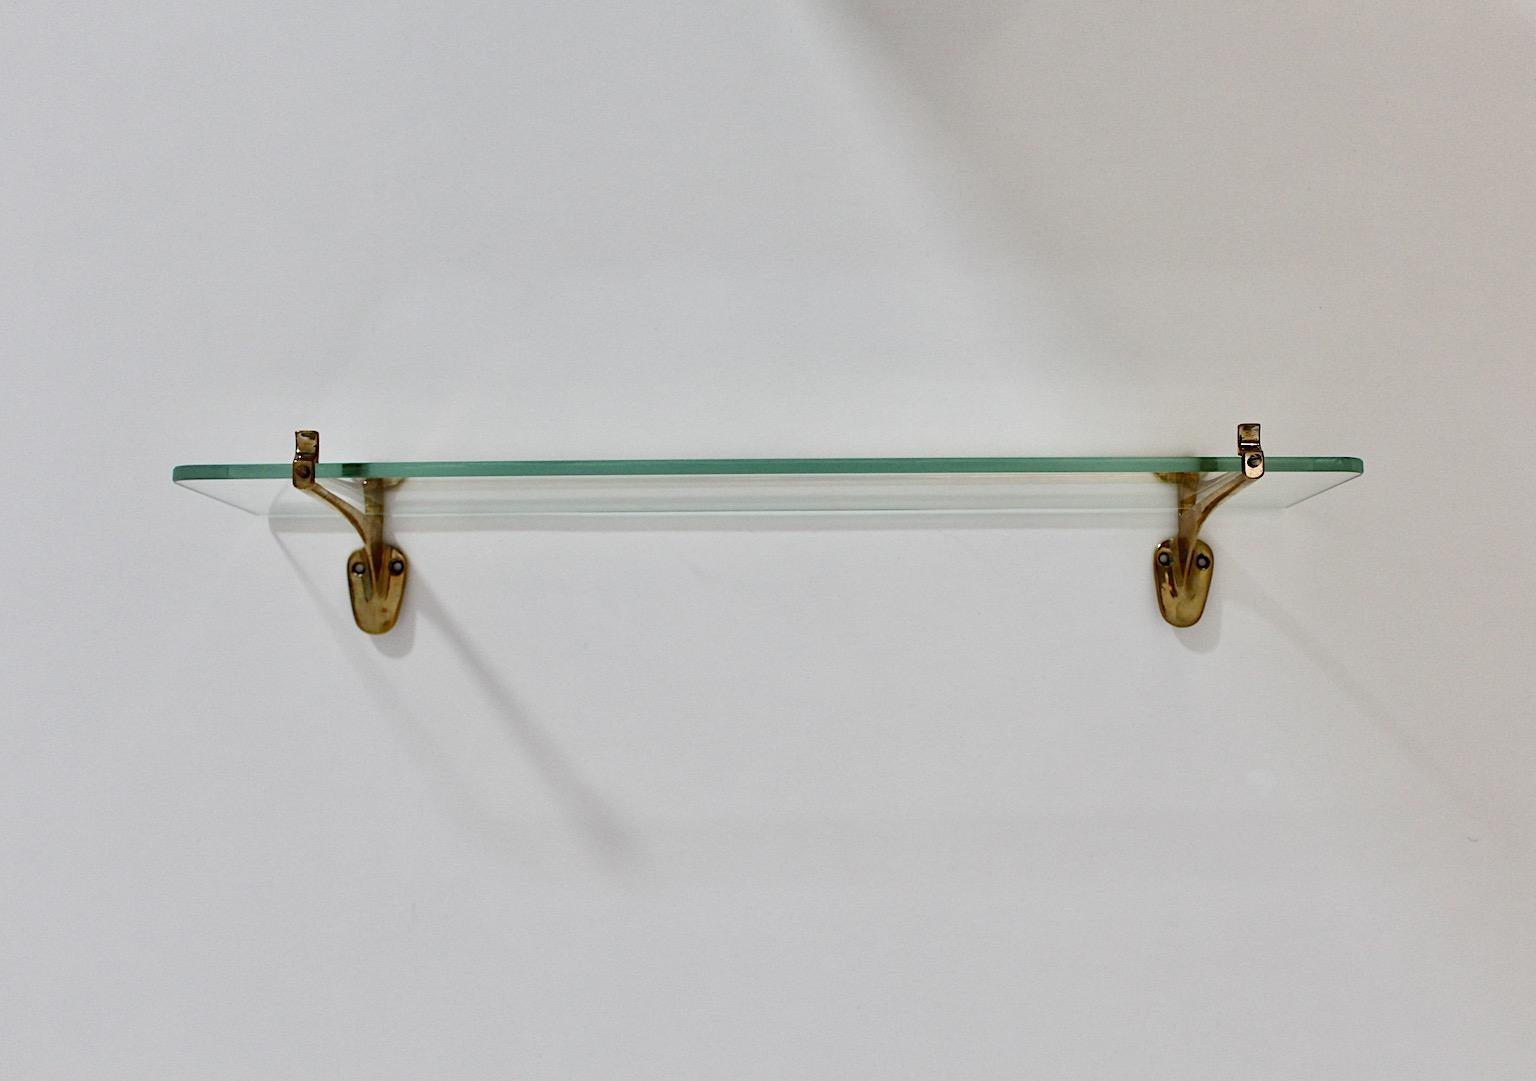 Modernist vintage shelf from solid brass and clear thick glass 1950s Italy.
A beautiful wall shelf from solid brass and thick glass designed and manufactured 1950s Italy.
This wall shelf features amazing brass details and a thick glass shelf. The